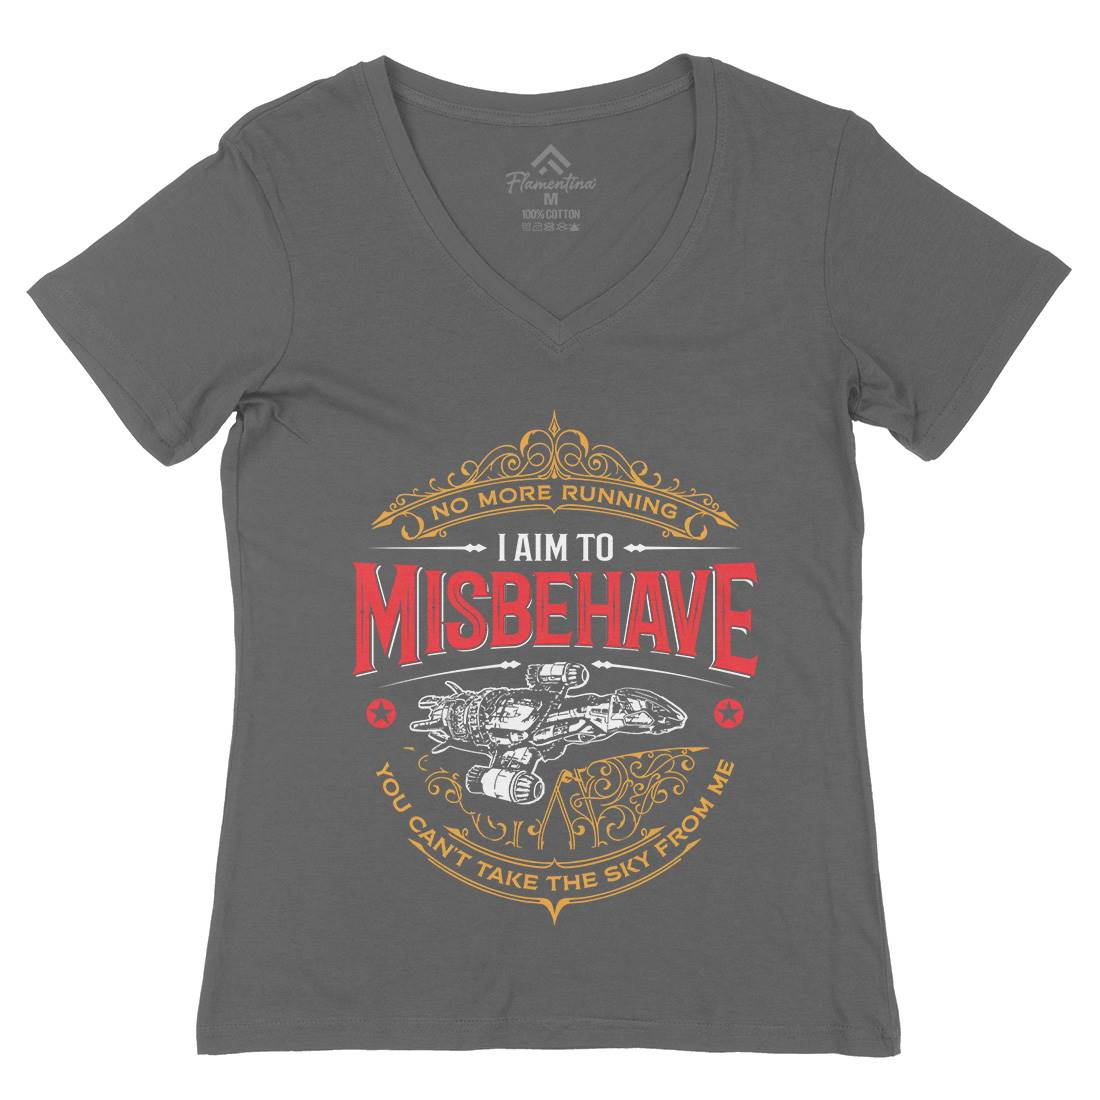 I Aim To Misbehave Womens Organic V-Neck T-Shirt Space D435